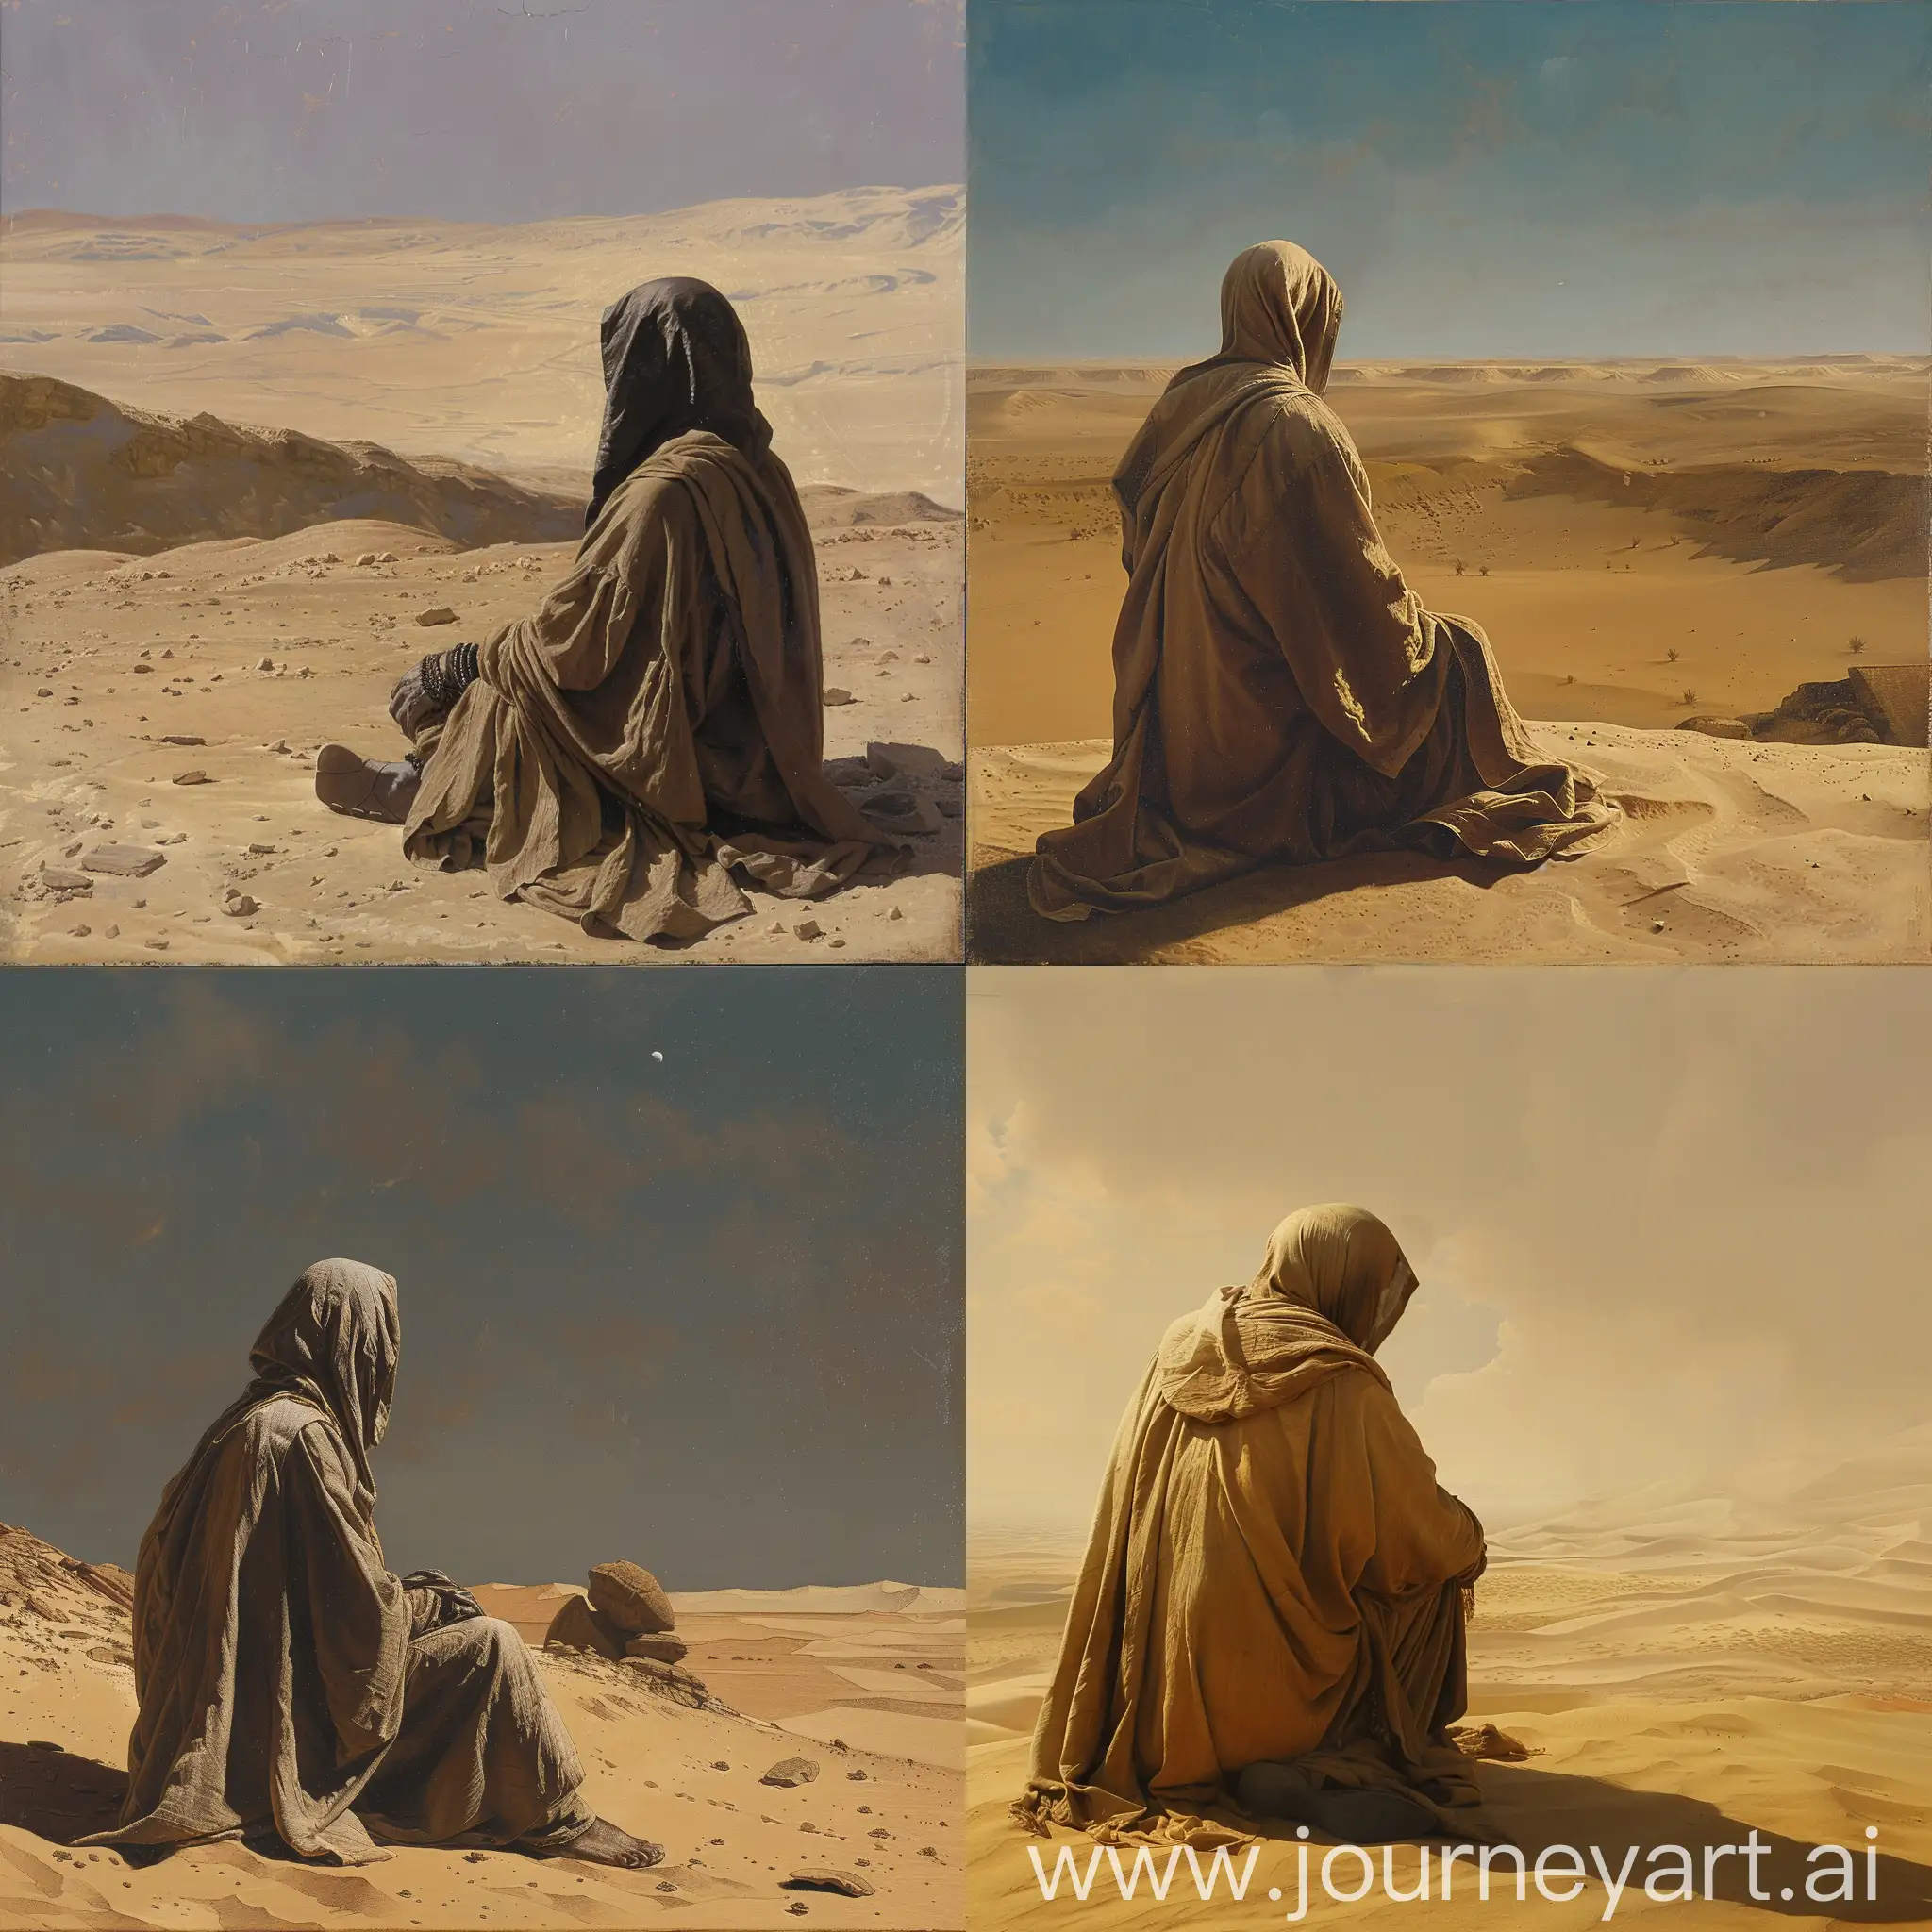 Robed-Man-in-Desert-Landscape-Waiting-Patiently